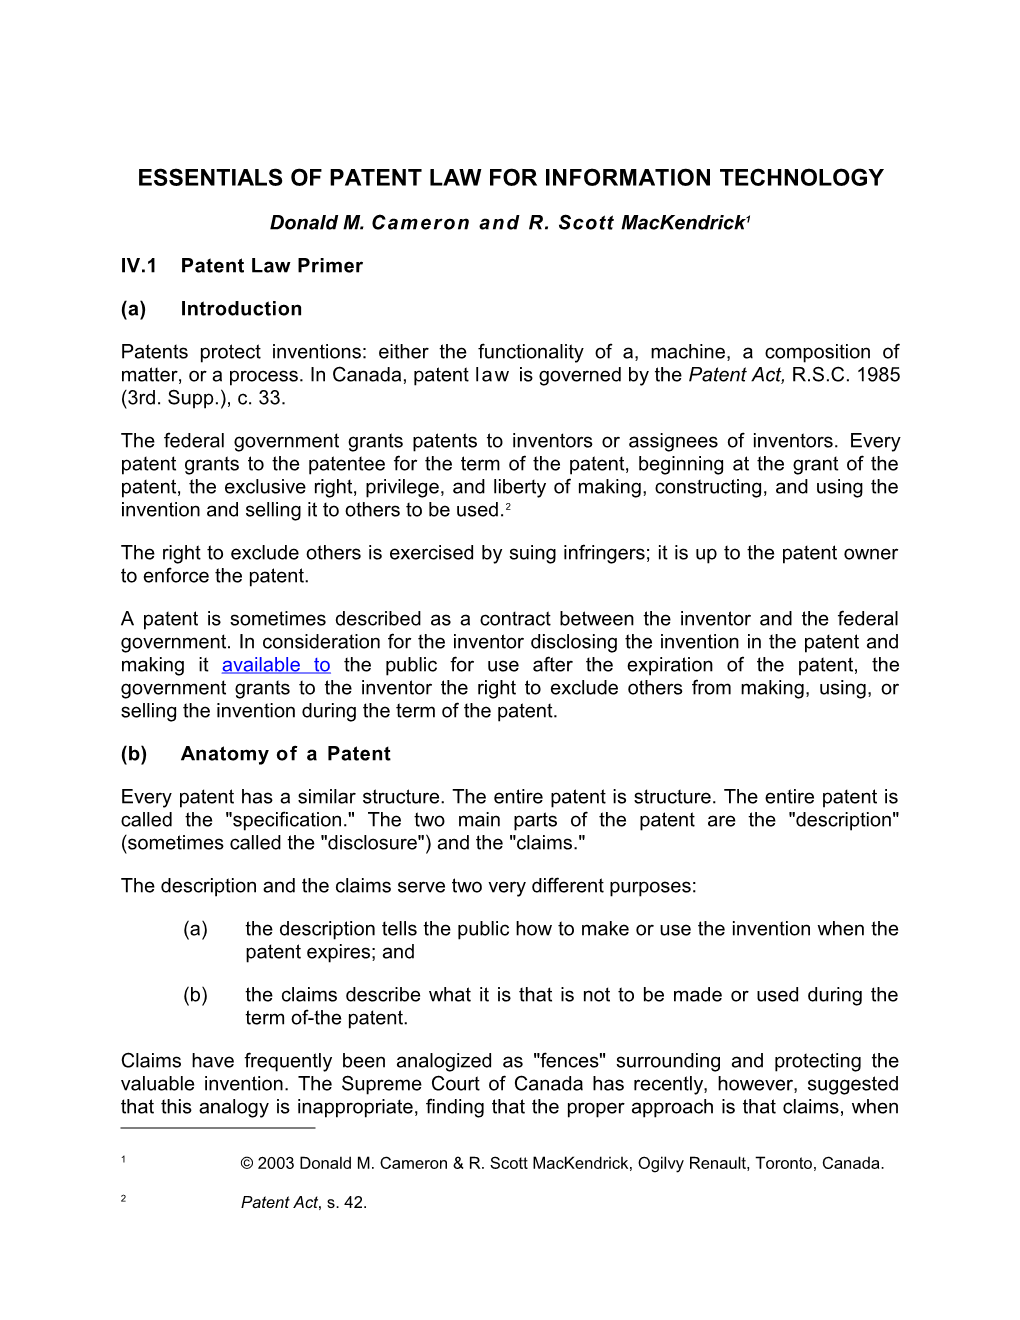 Essentials of Patent Law for Information Technology